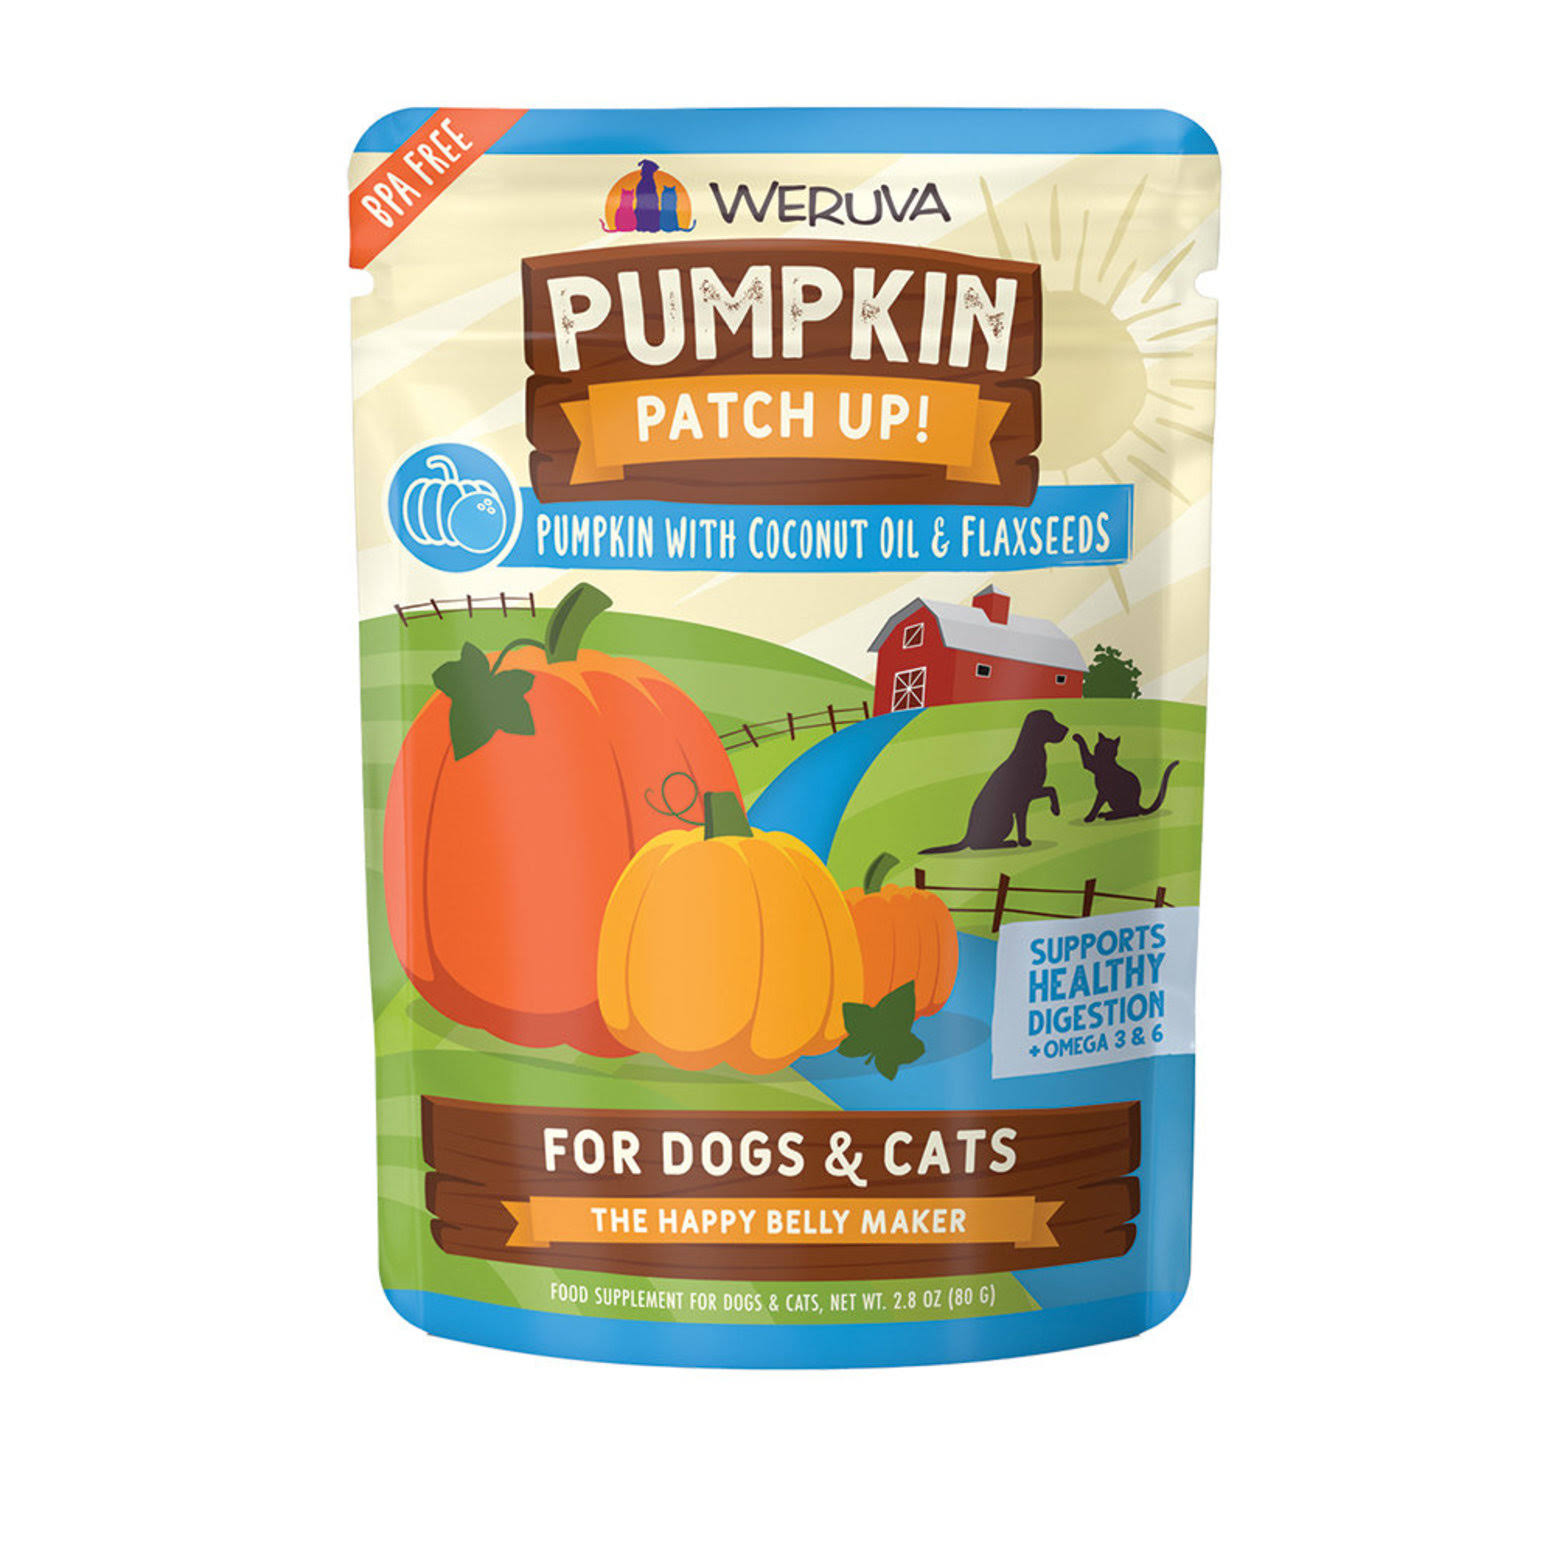 Pumpkin Patch Up - Pumpkin with Coconut Oil & Flaxseeds, 1.5 oz